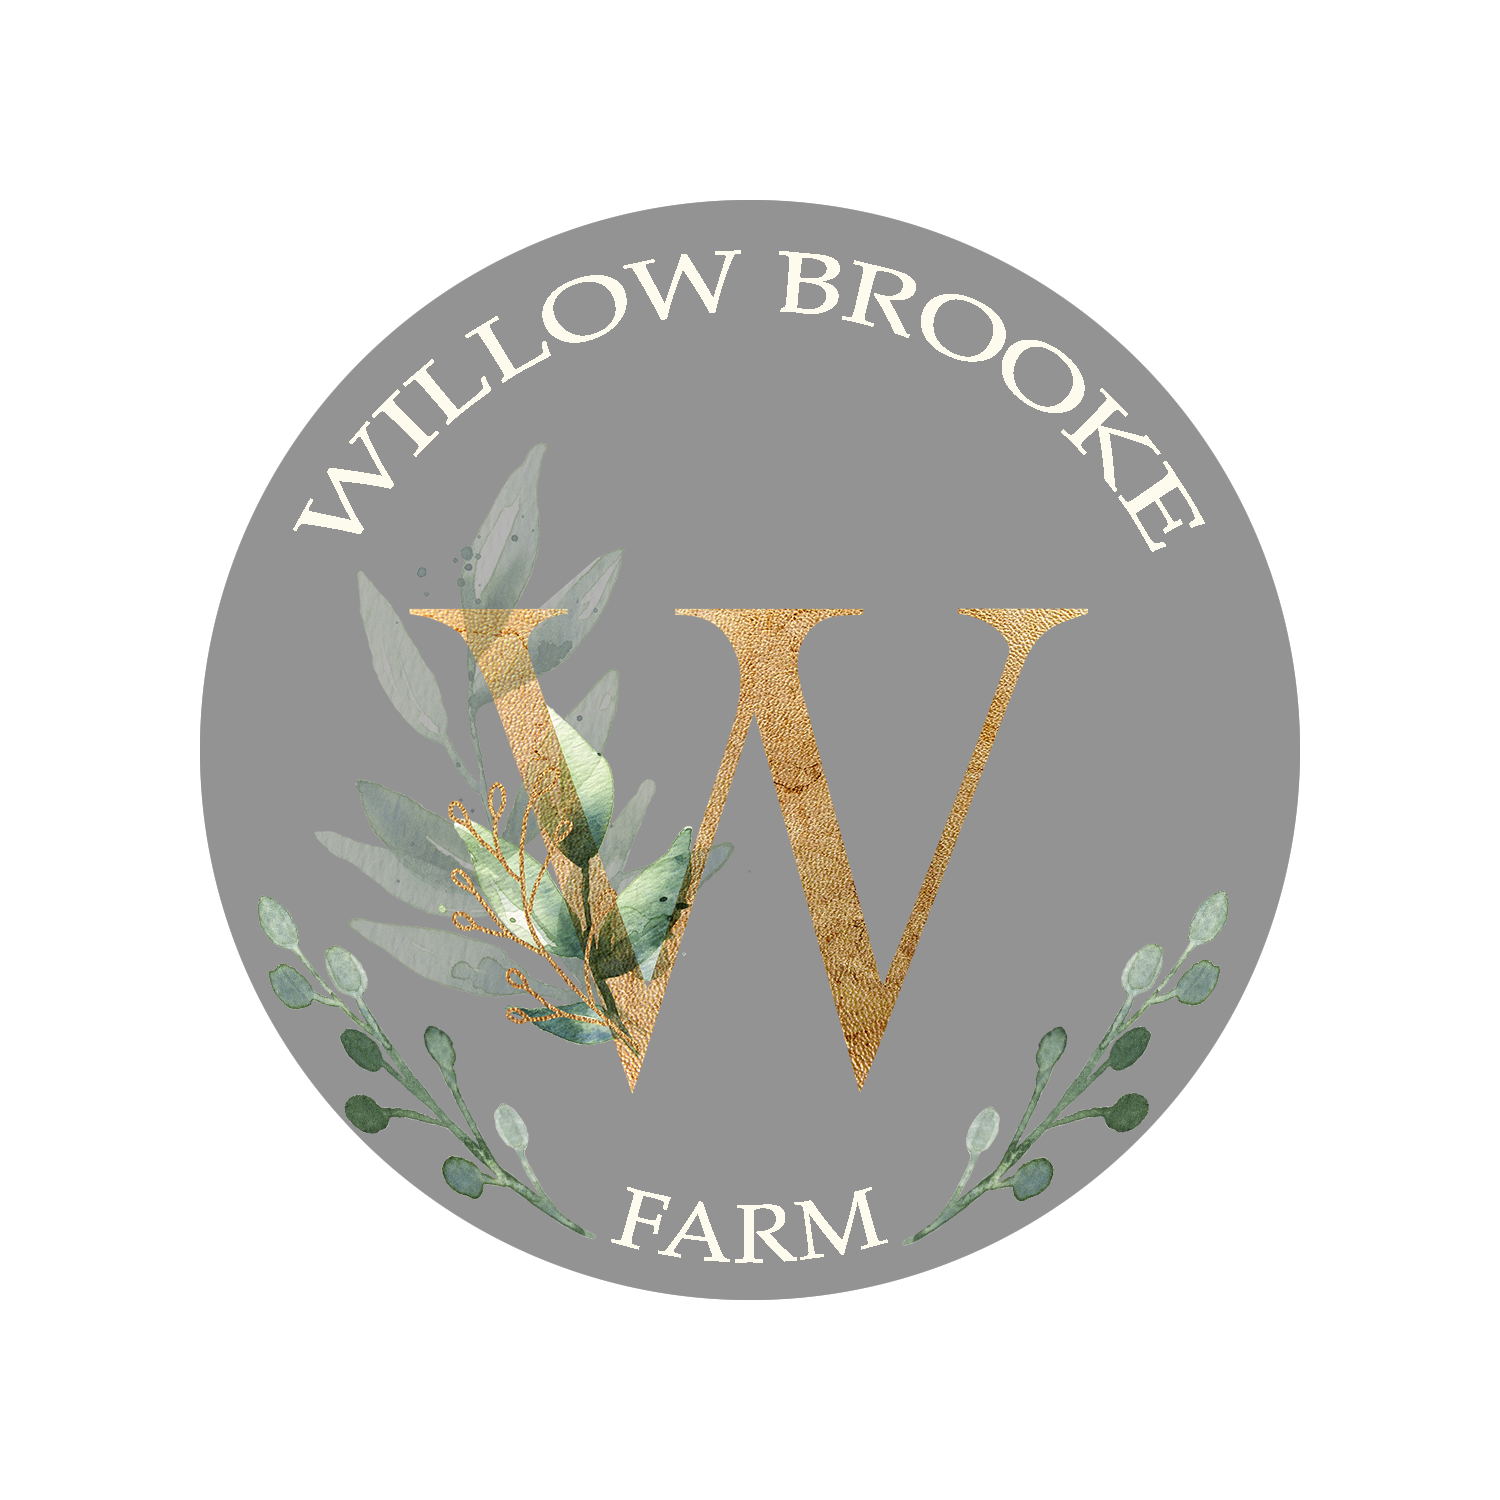 Willow Brooke Farm | Reception Venues - The Knot